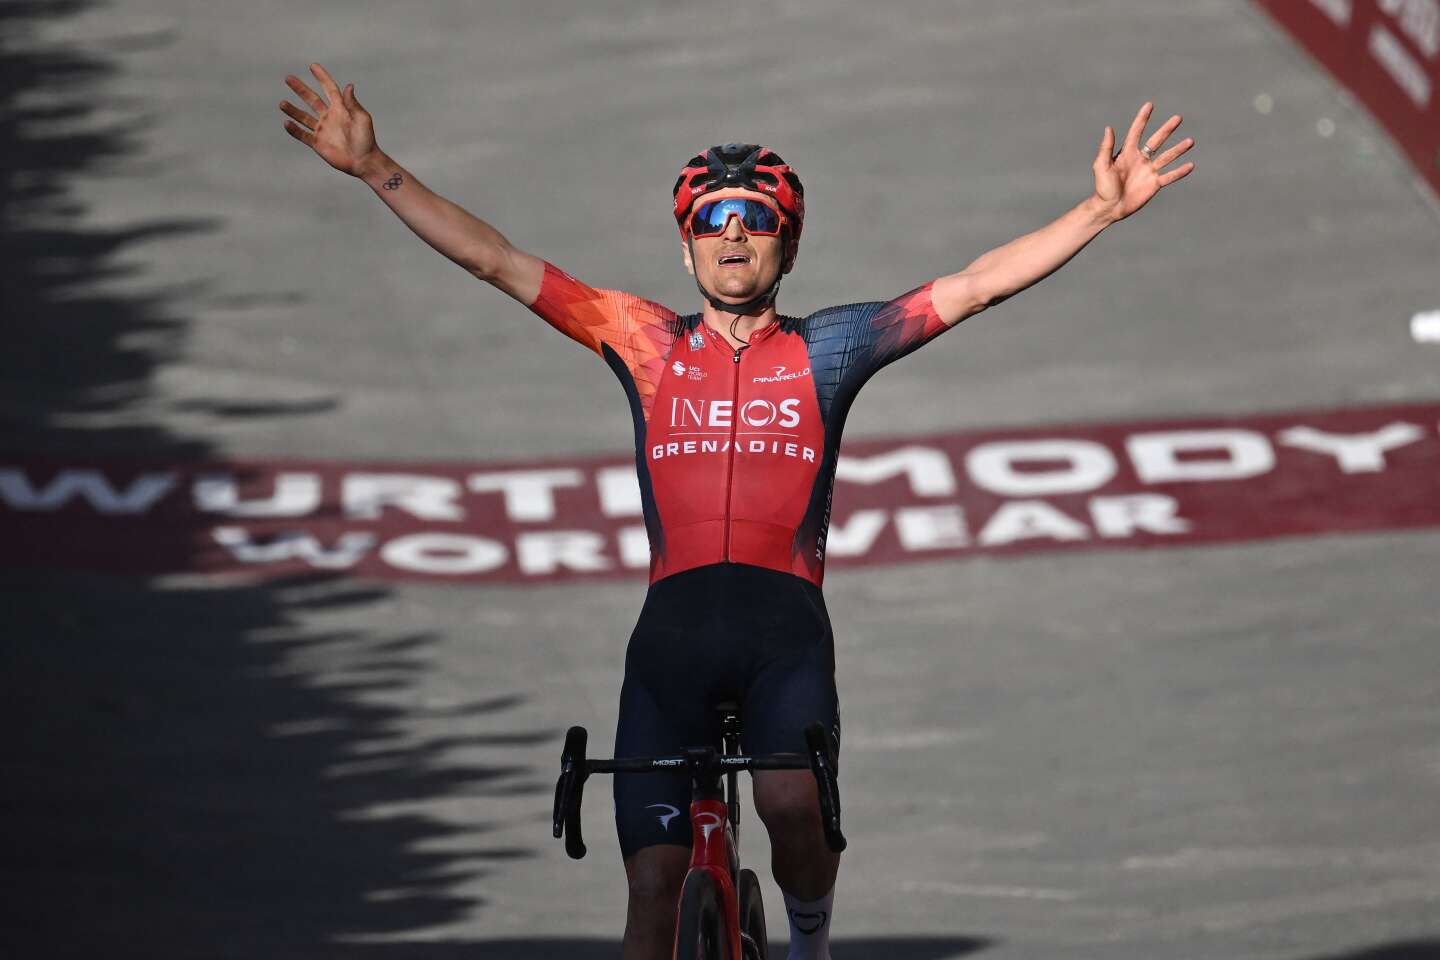 Thomas Pidcock wins the Strade Bianche ahead of Valentin Madouas